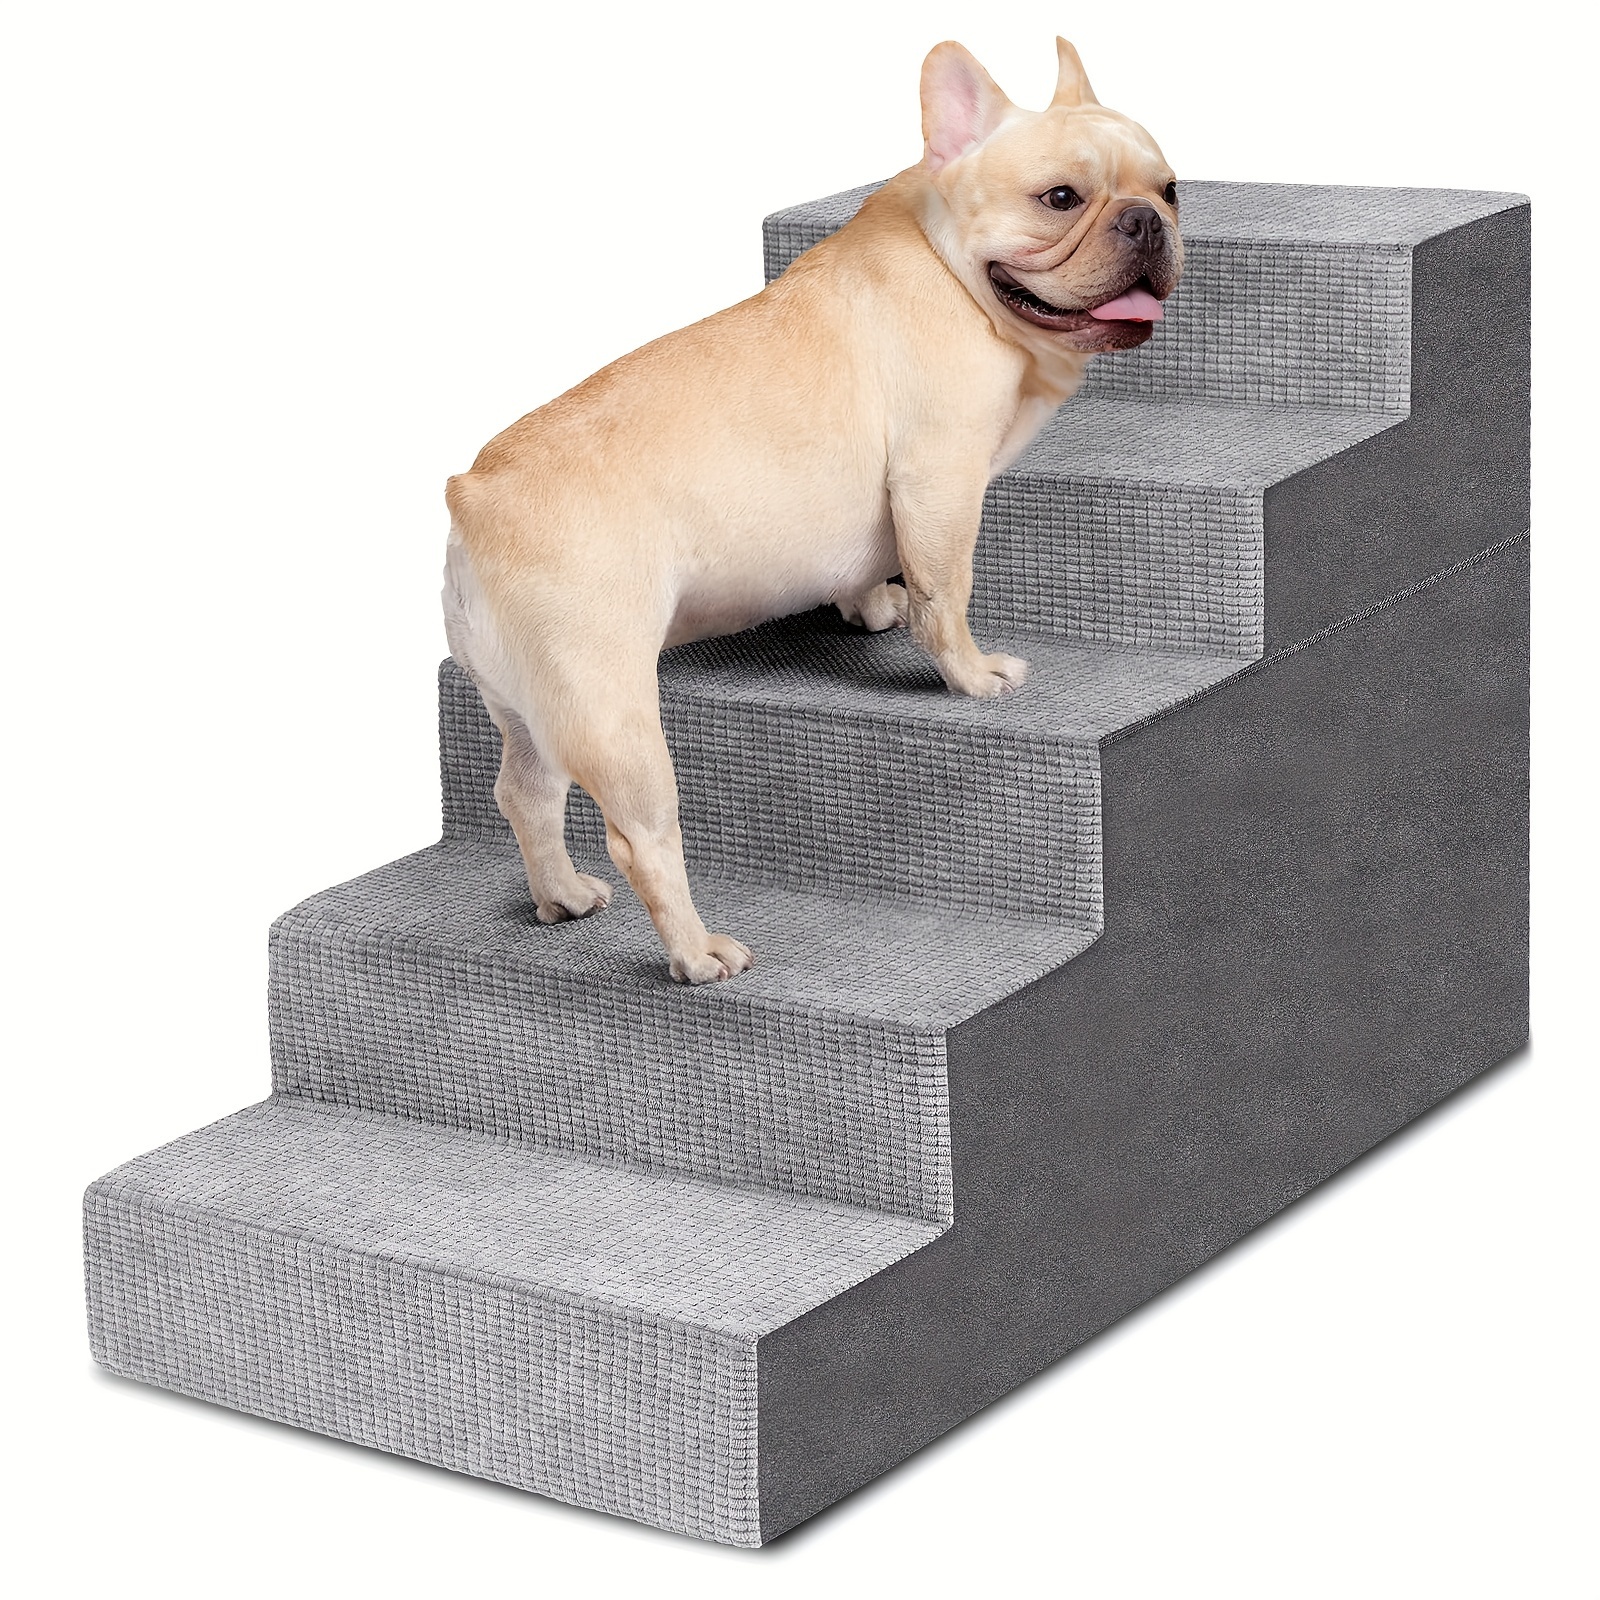 

Dog Stairs For Small Dogs, 5-step Dog Steps For High Bed And Couch, High-density Foam Pet Steps With Supporting Board, Non-slip Removable Washable Cover, Grey